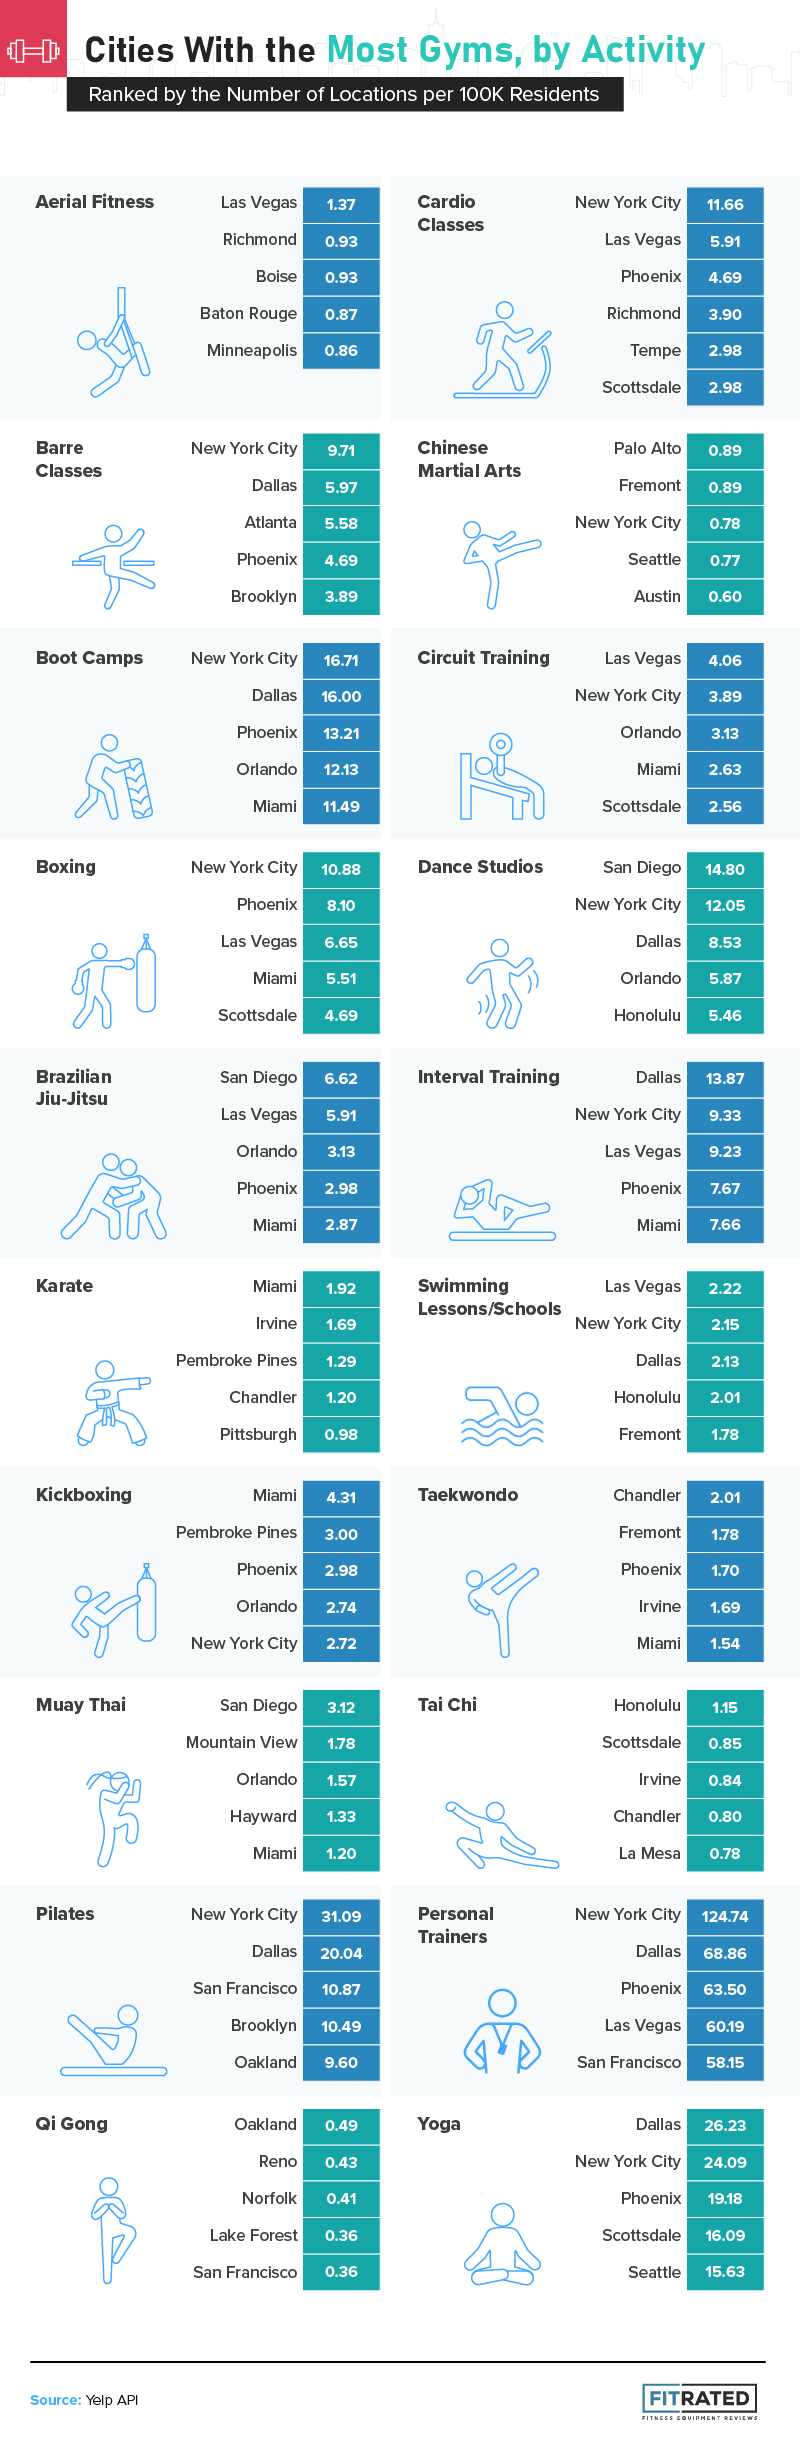 cities with the most gyms based on type of activity 